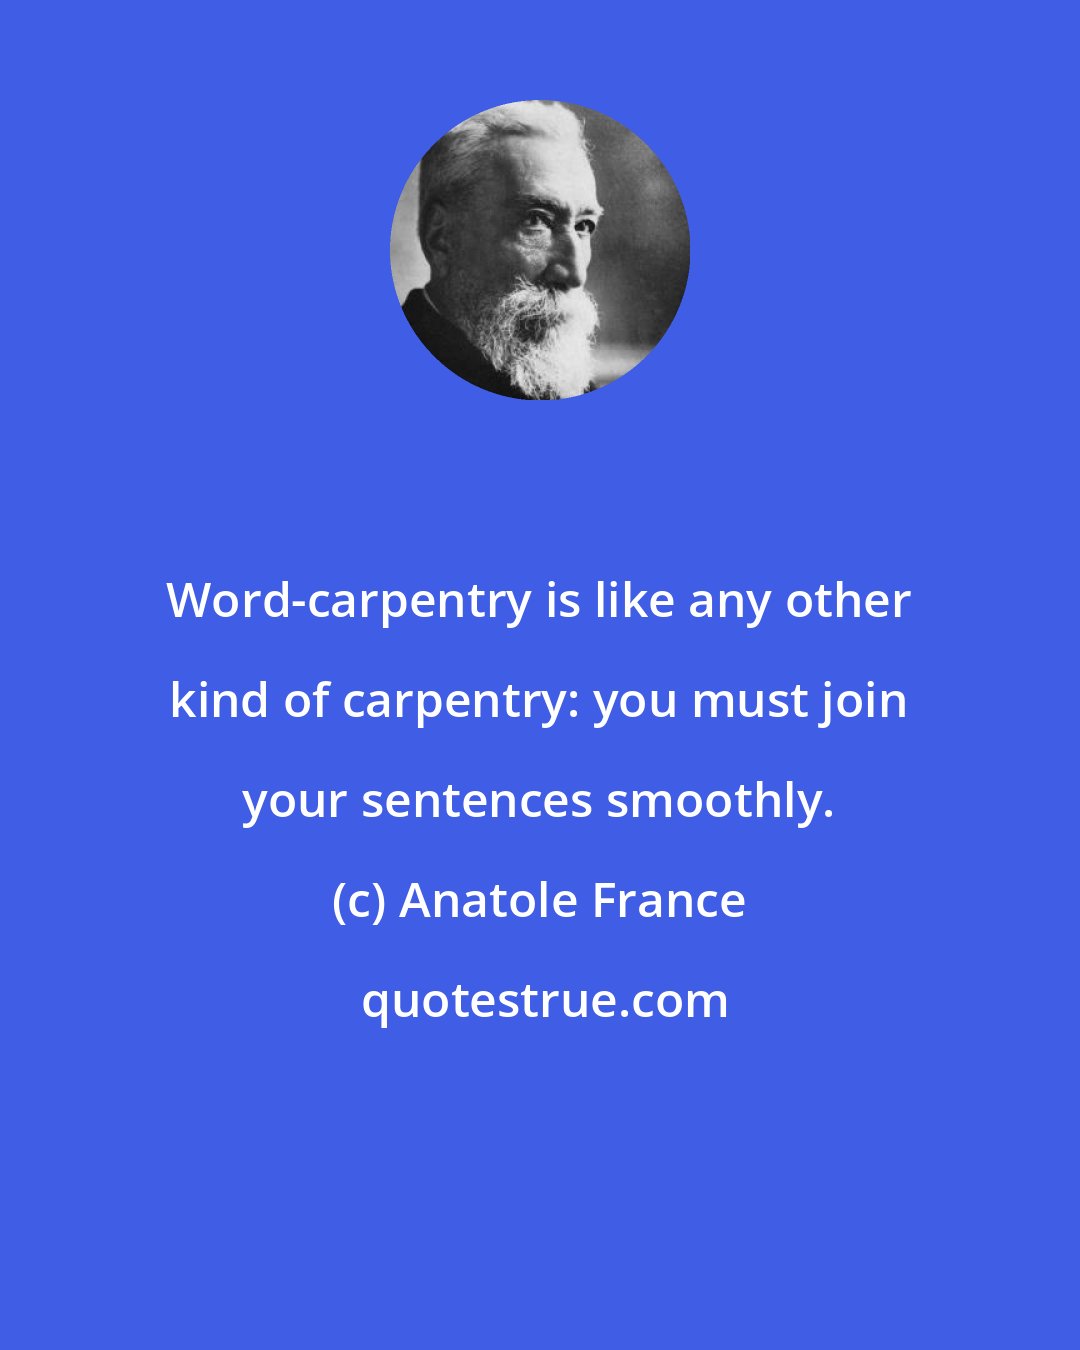 Anatole France: Word-carpentry is like any other kind of carpentry: you must join your sentences smoothly.